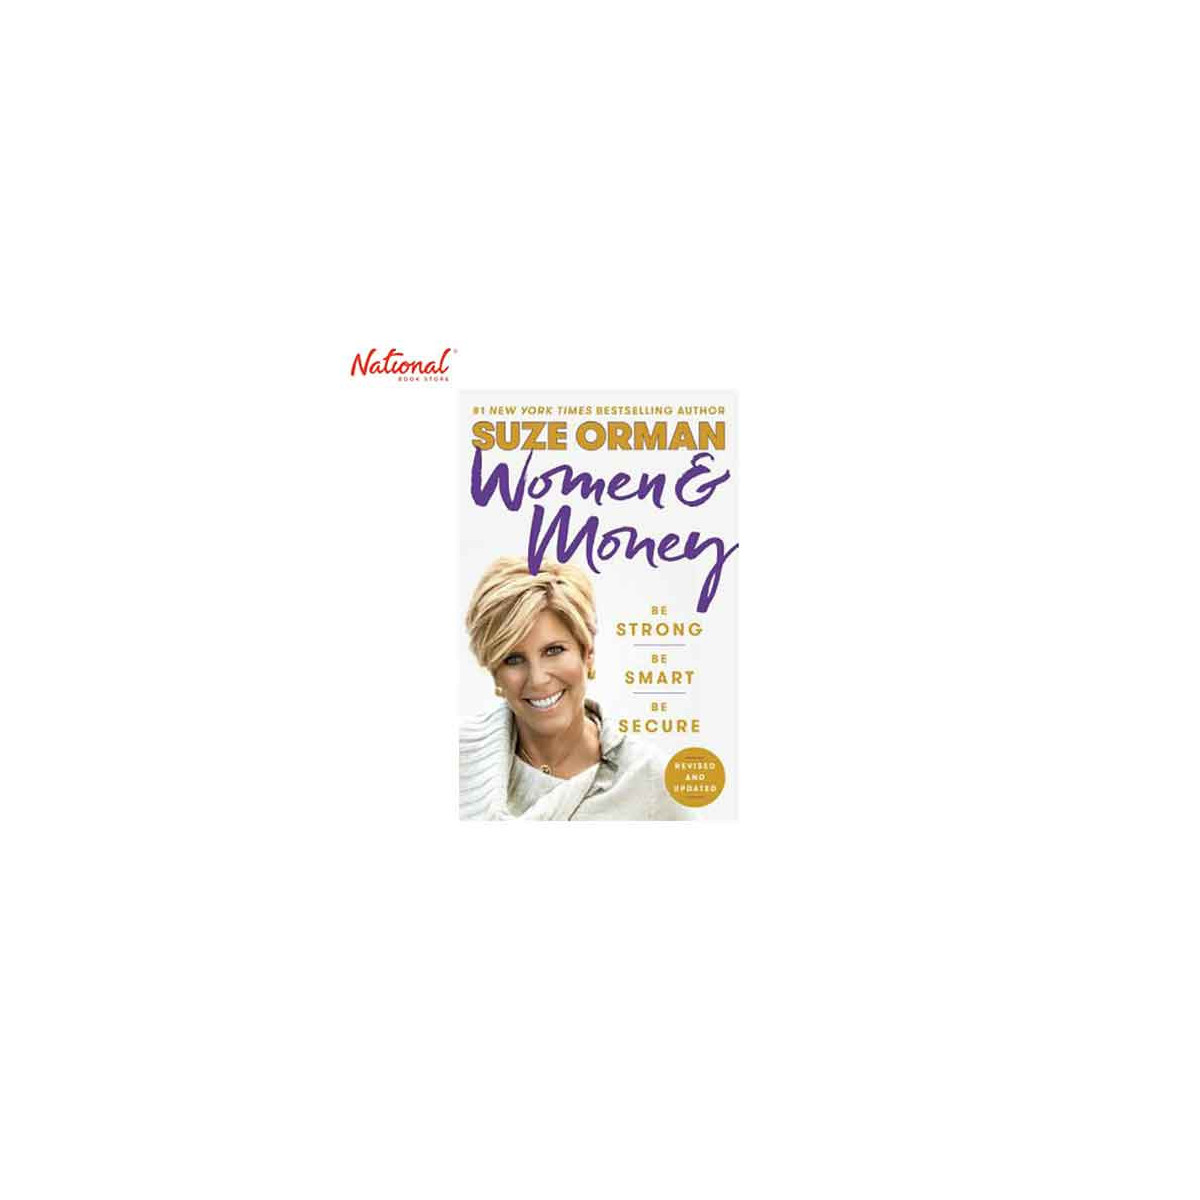 WOMEN & MONEY: BE STRONG BE SMART BE SECURE (REVISED AND UPDATED) HARDCOVER